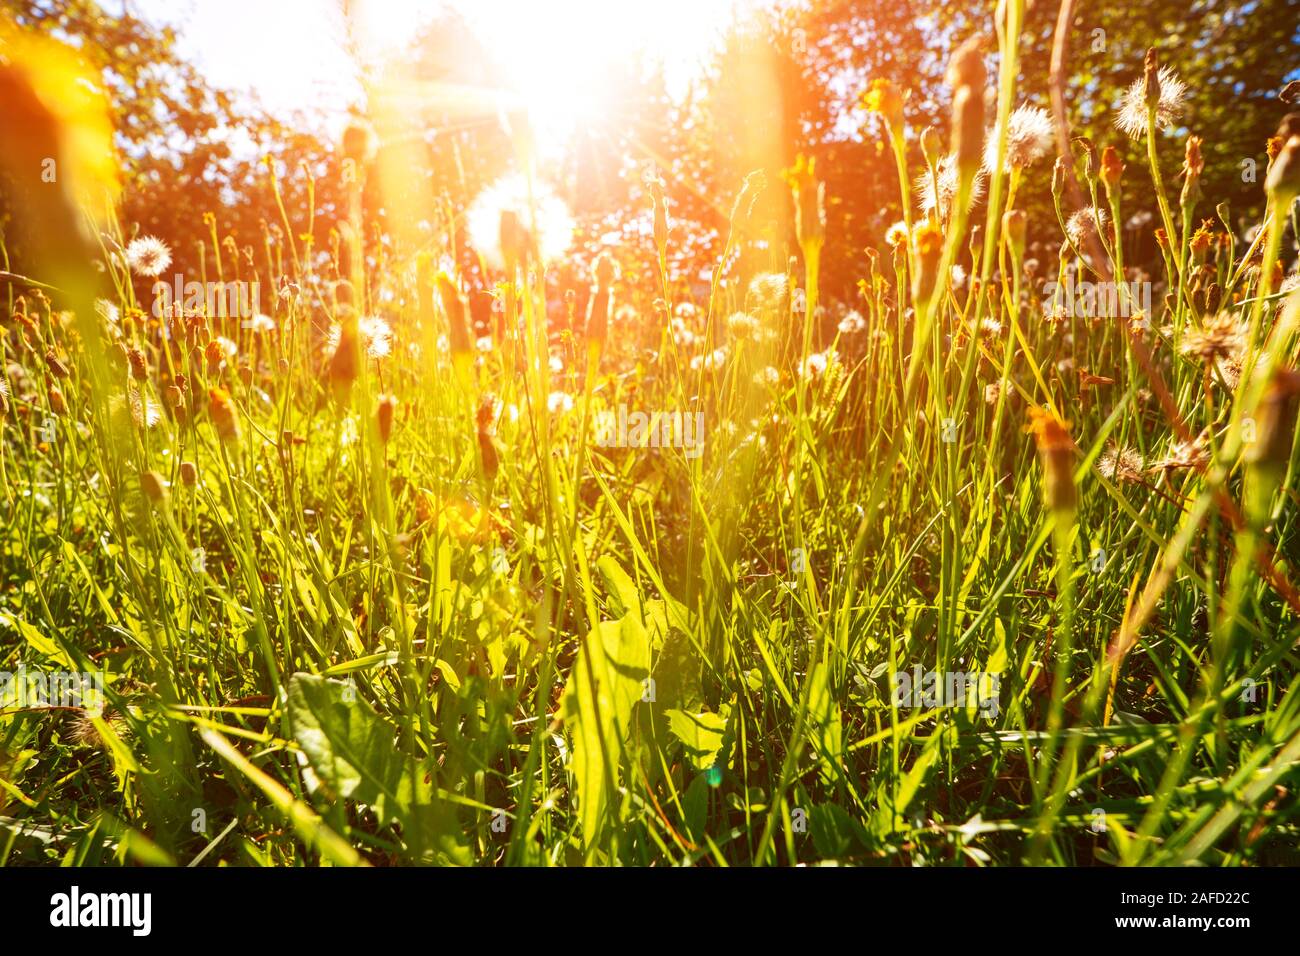 Summer sunset countryside landscape with sunbeams. Alpine herbs, grass in foreground. Sunny day in fresh air Stock Photo